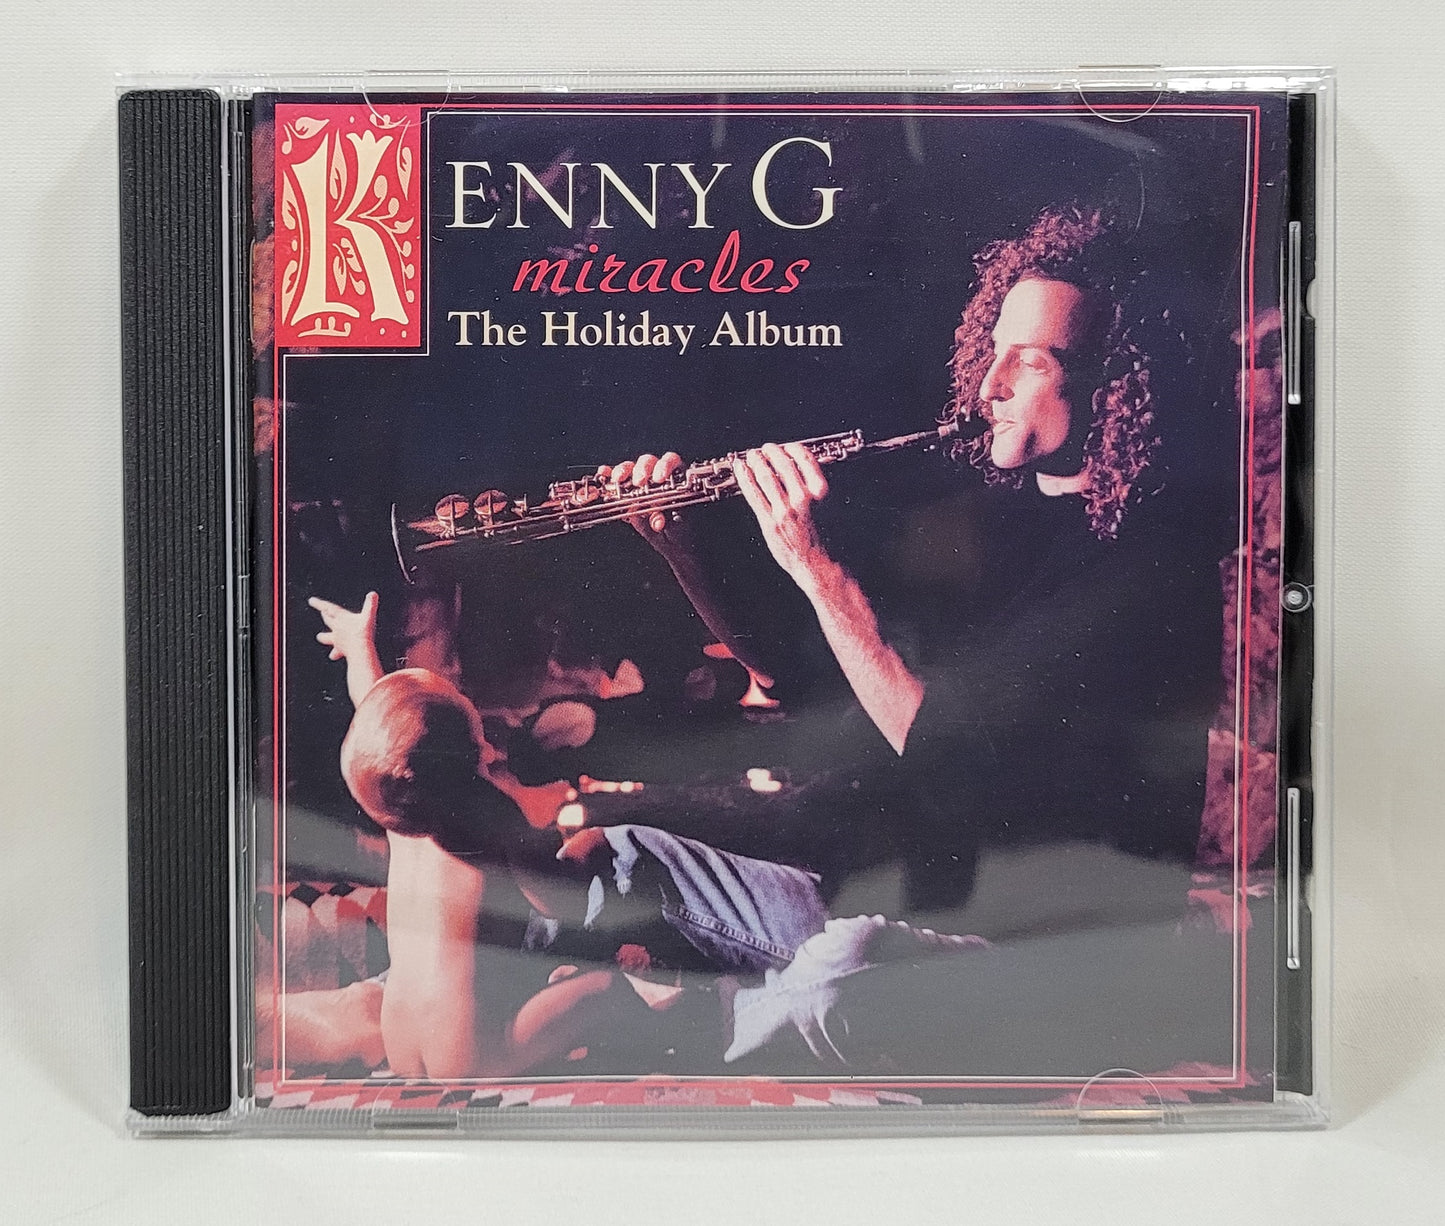 Kenny G - Miracles - The Holiday Album [CD] [B]